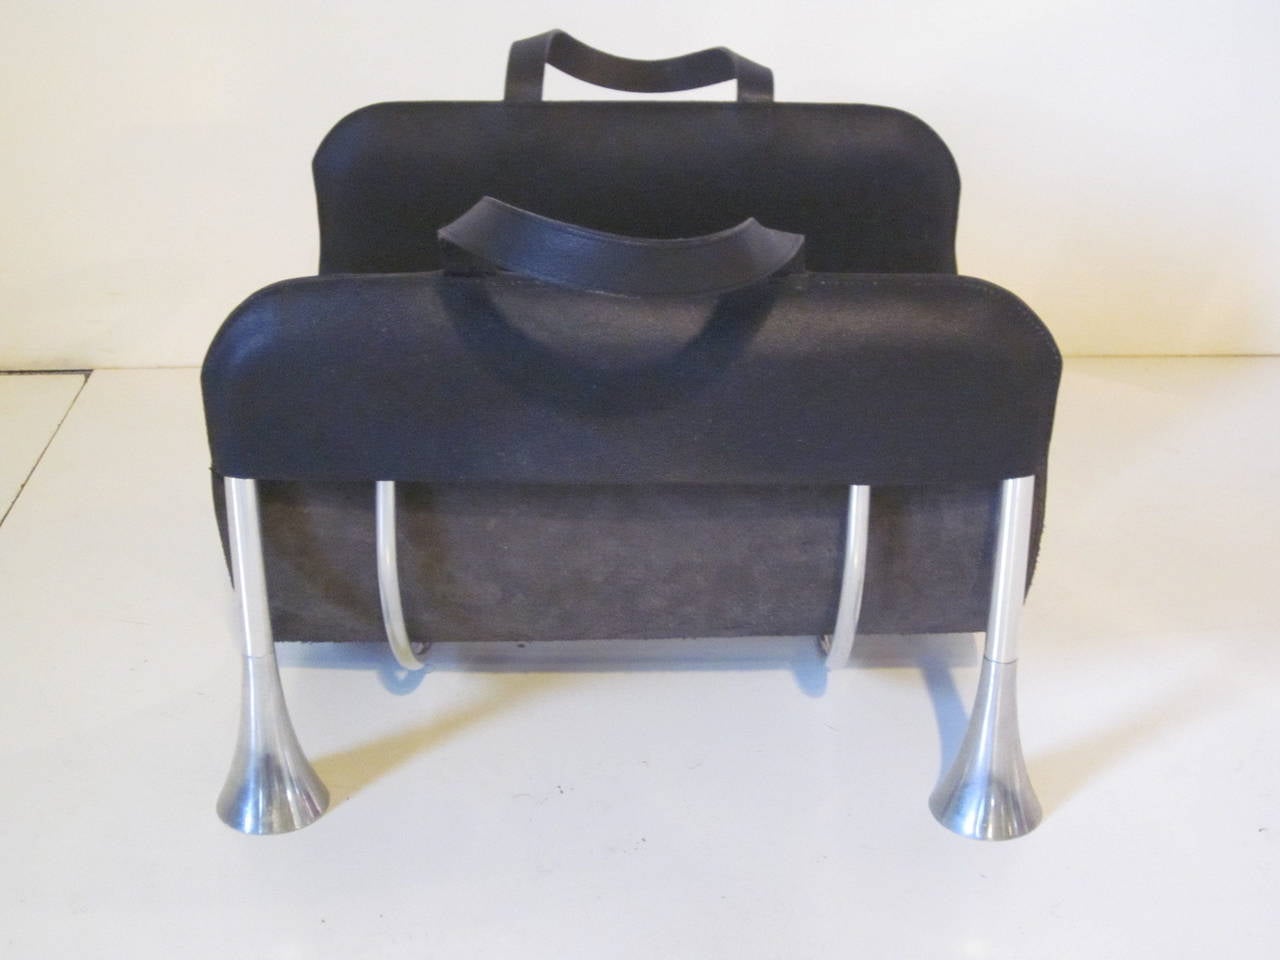 A black pebbled leather and aluminum log or magazine holder, used as a log holder it has a slip off leather carrier with handles for toting wood and could be used as a magazine rack and when done tote them to the recycling bin when finished.